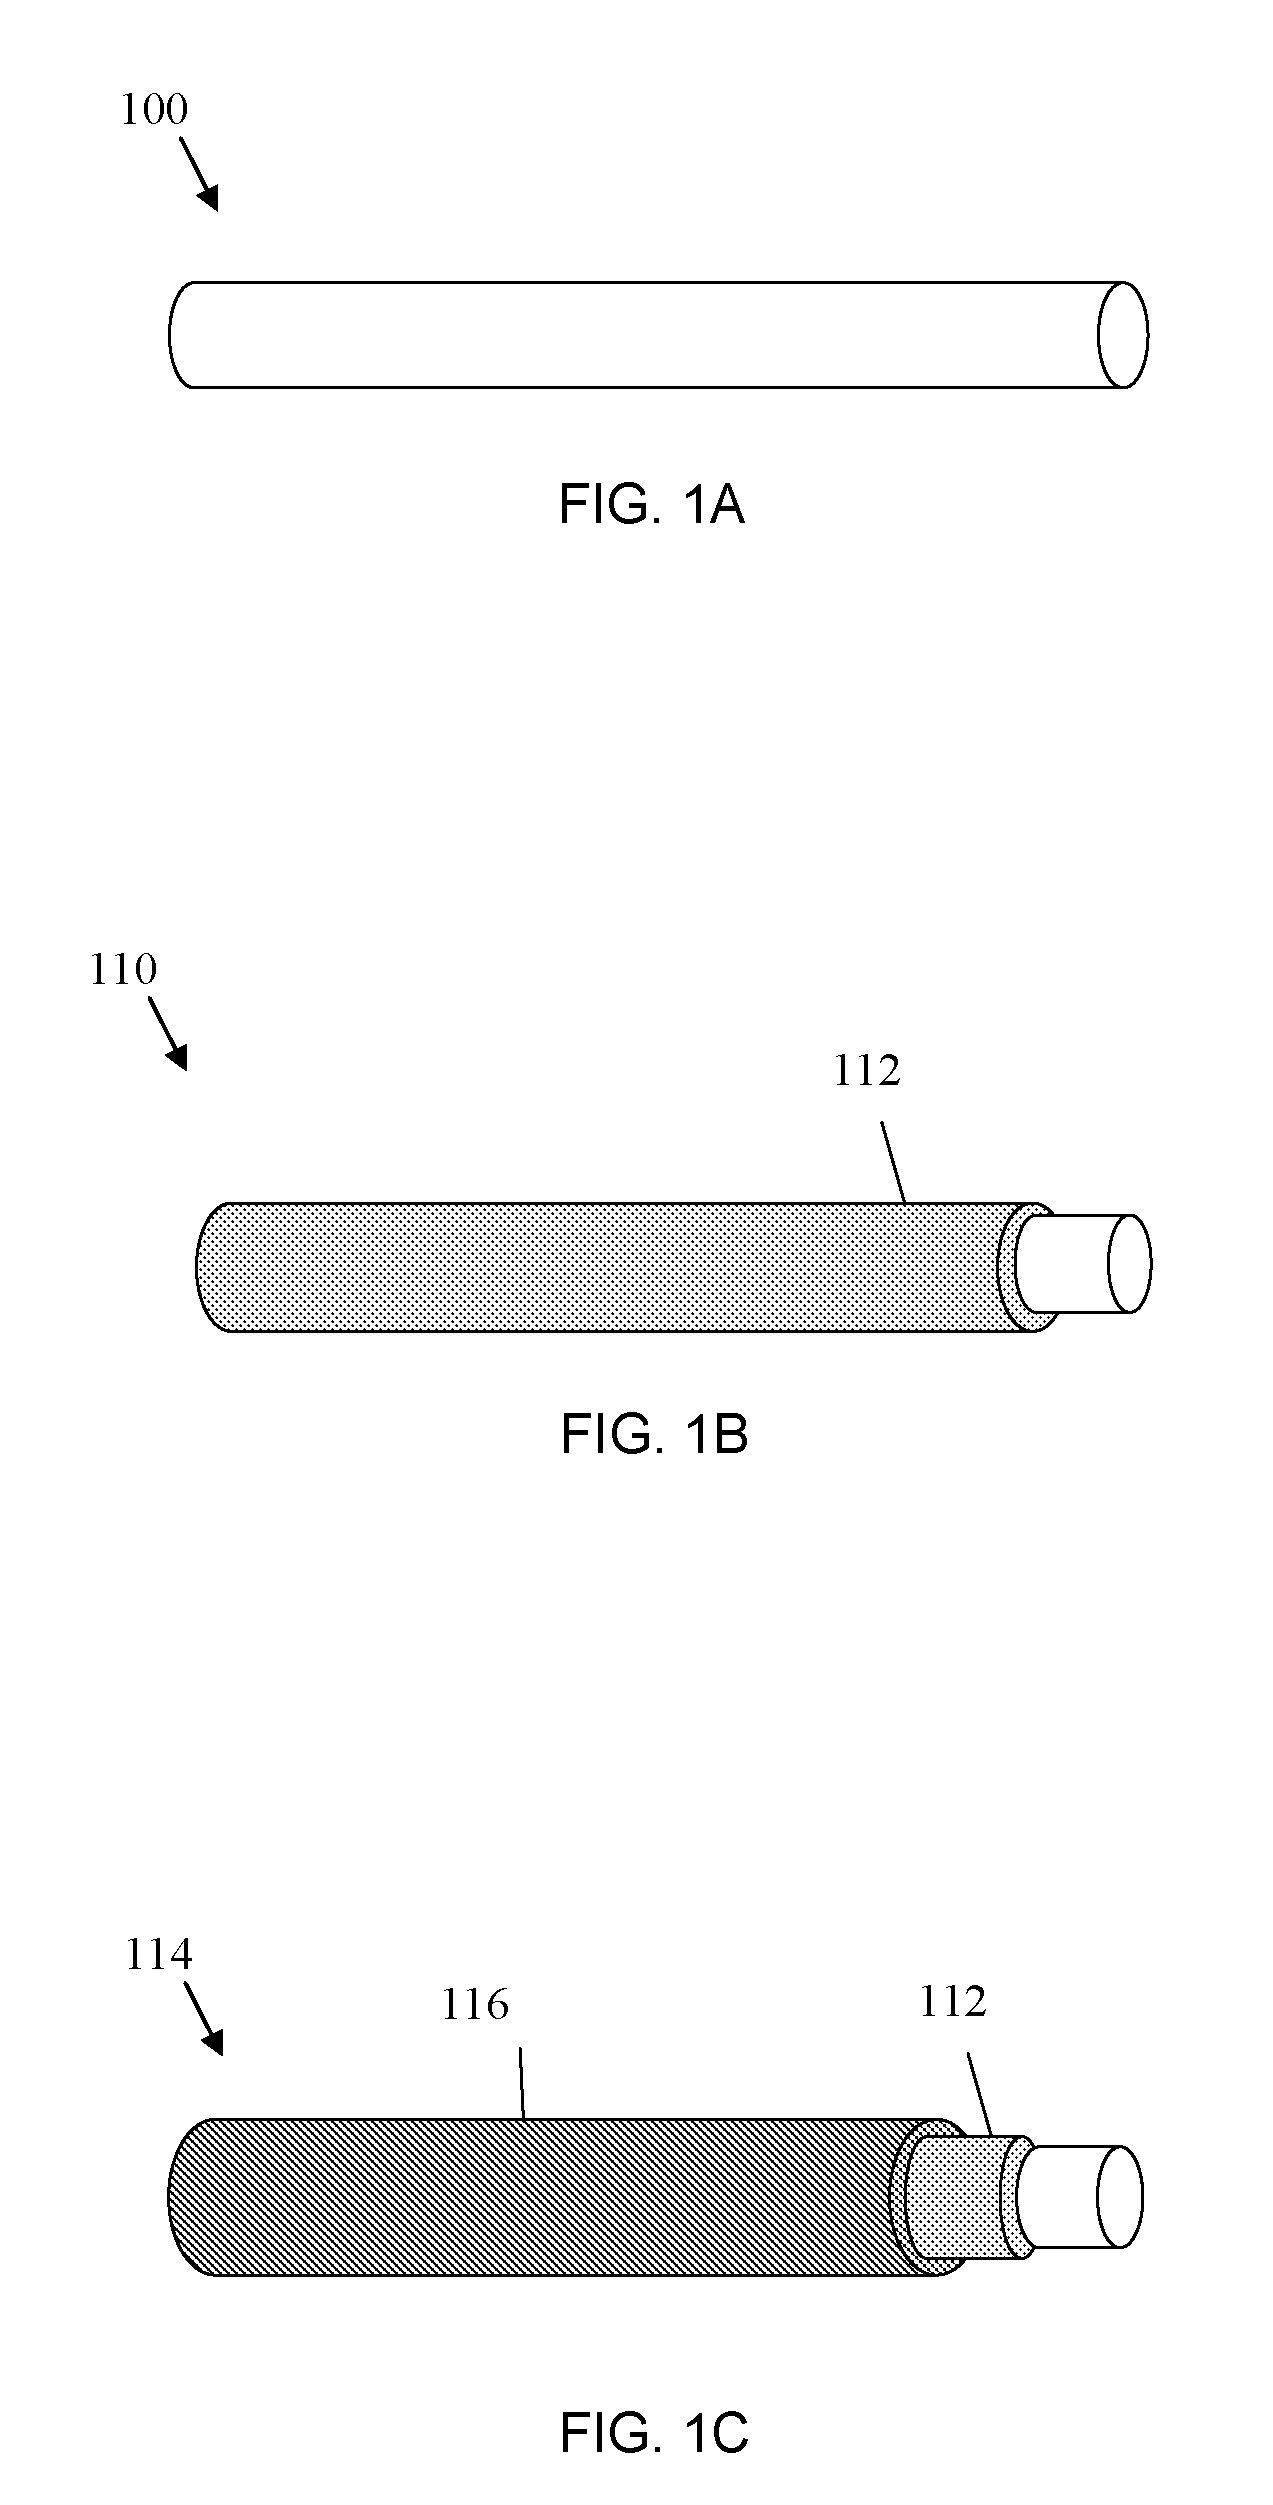 Method and system for printing aligned nanowires and other electrical devices